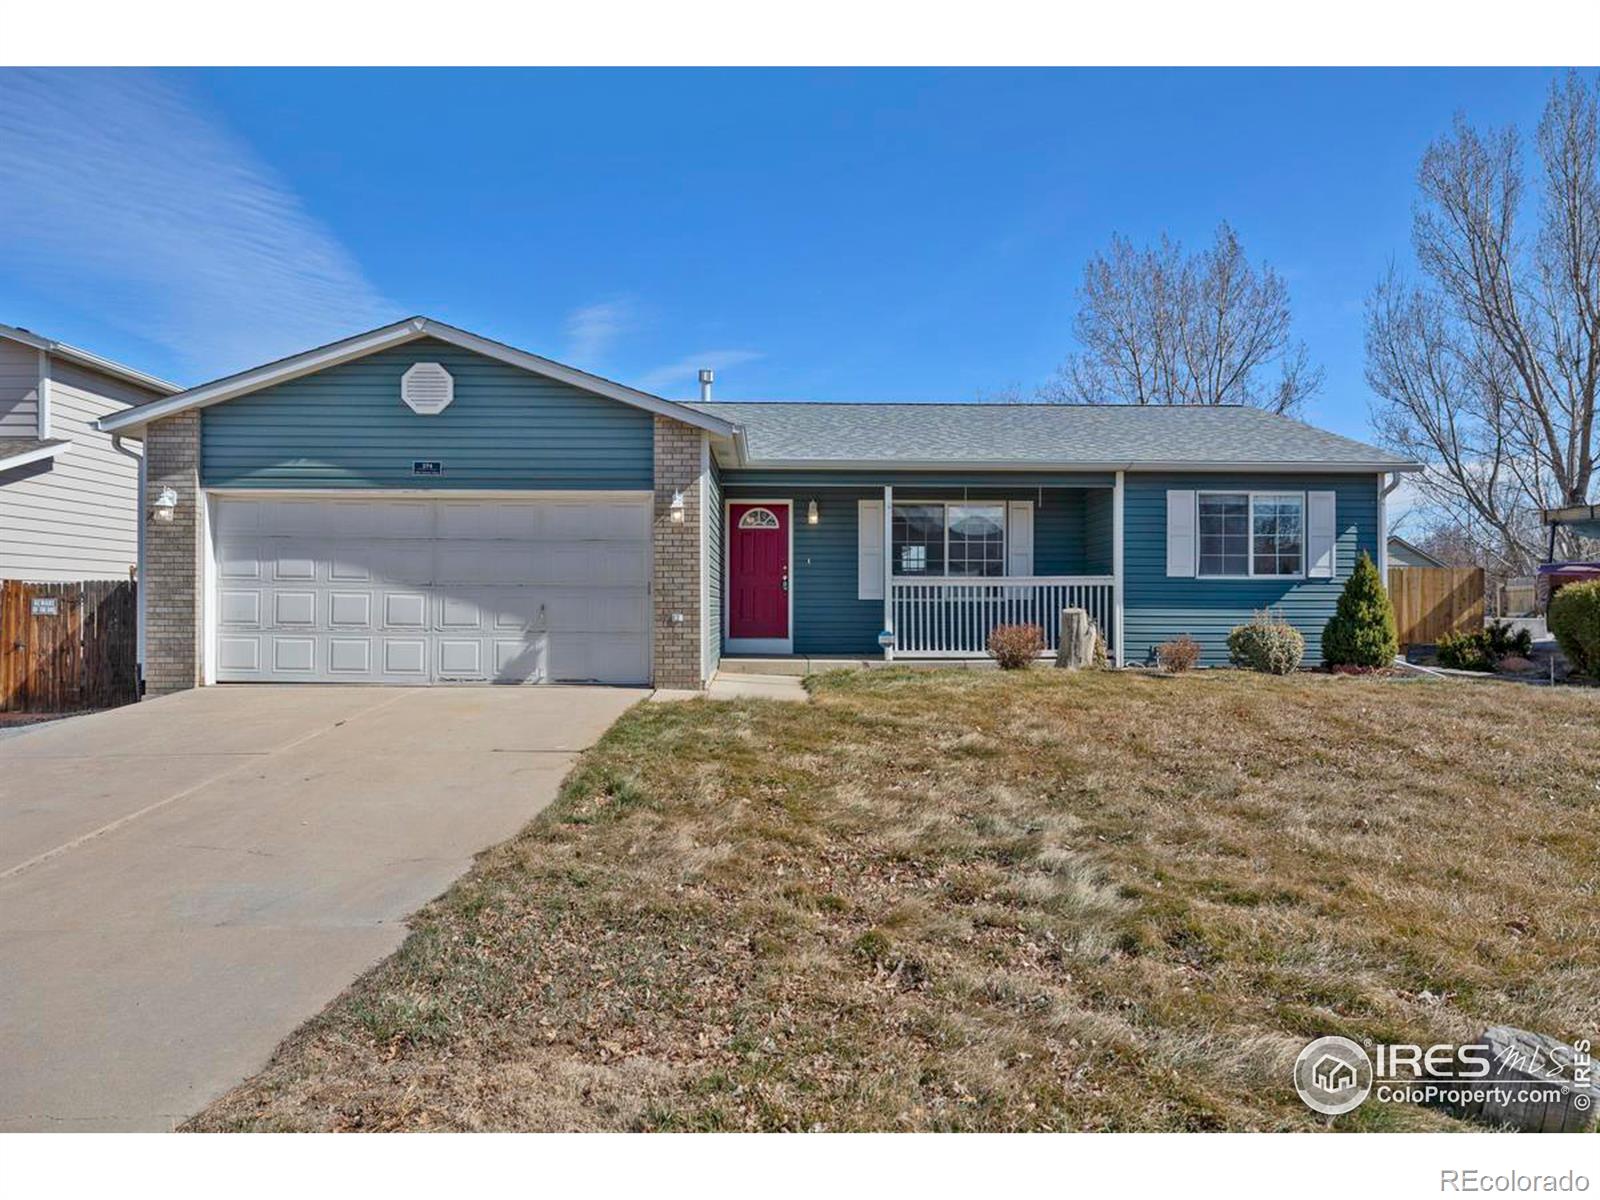 374  50th Ave Pl, greeley MLS: 4567891004698 Beds: 5 Baths: 3 Price: $450,000